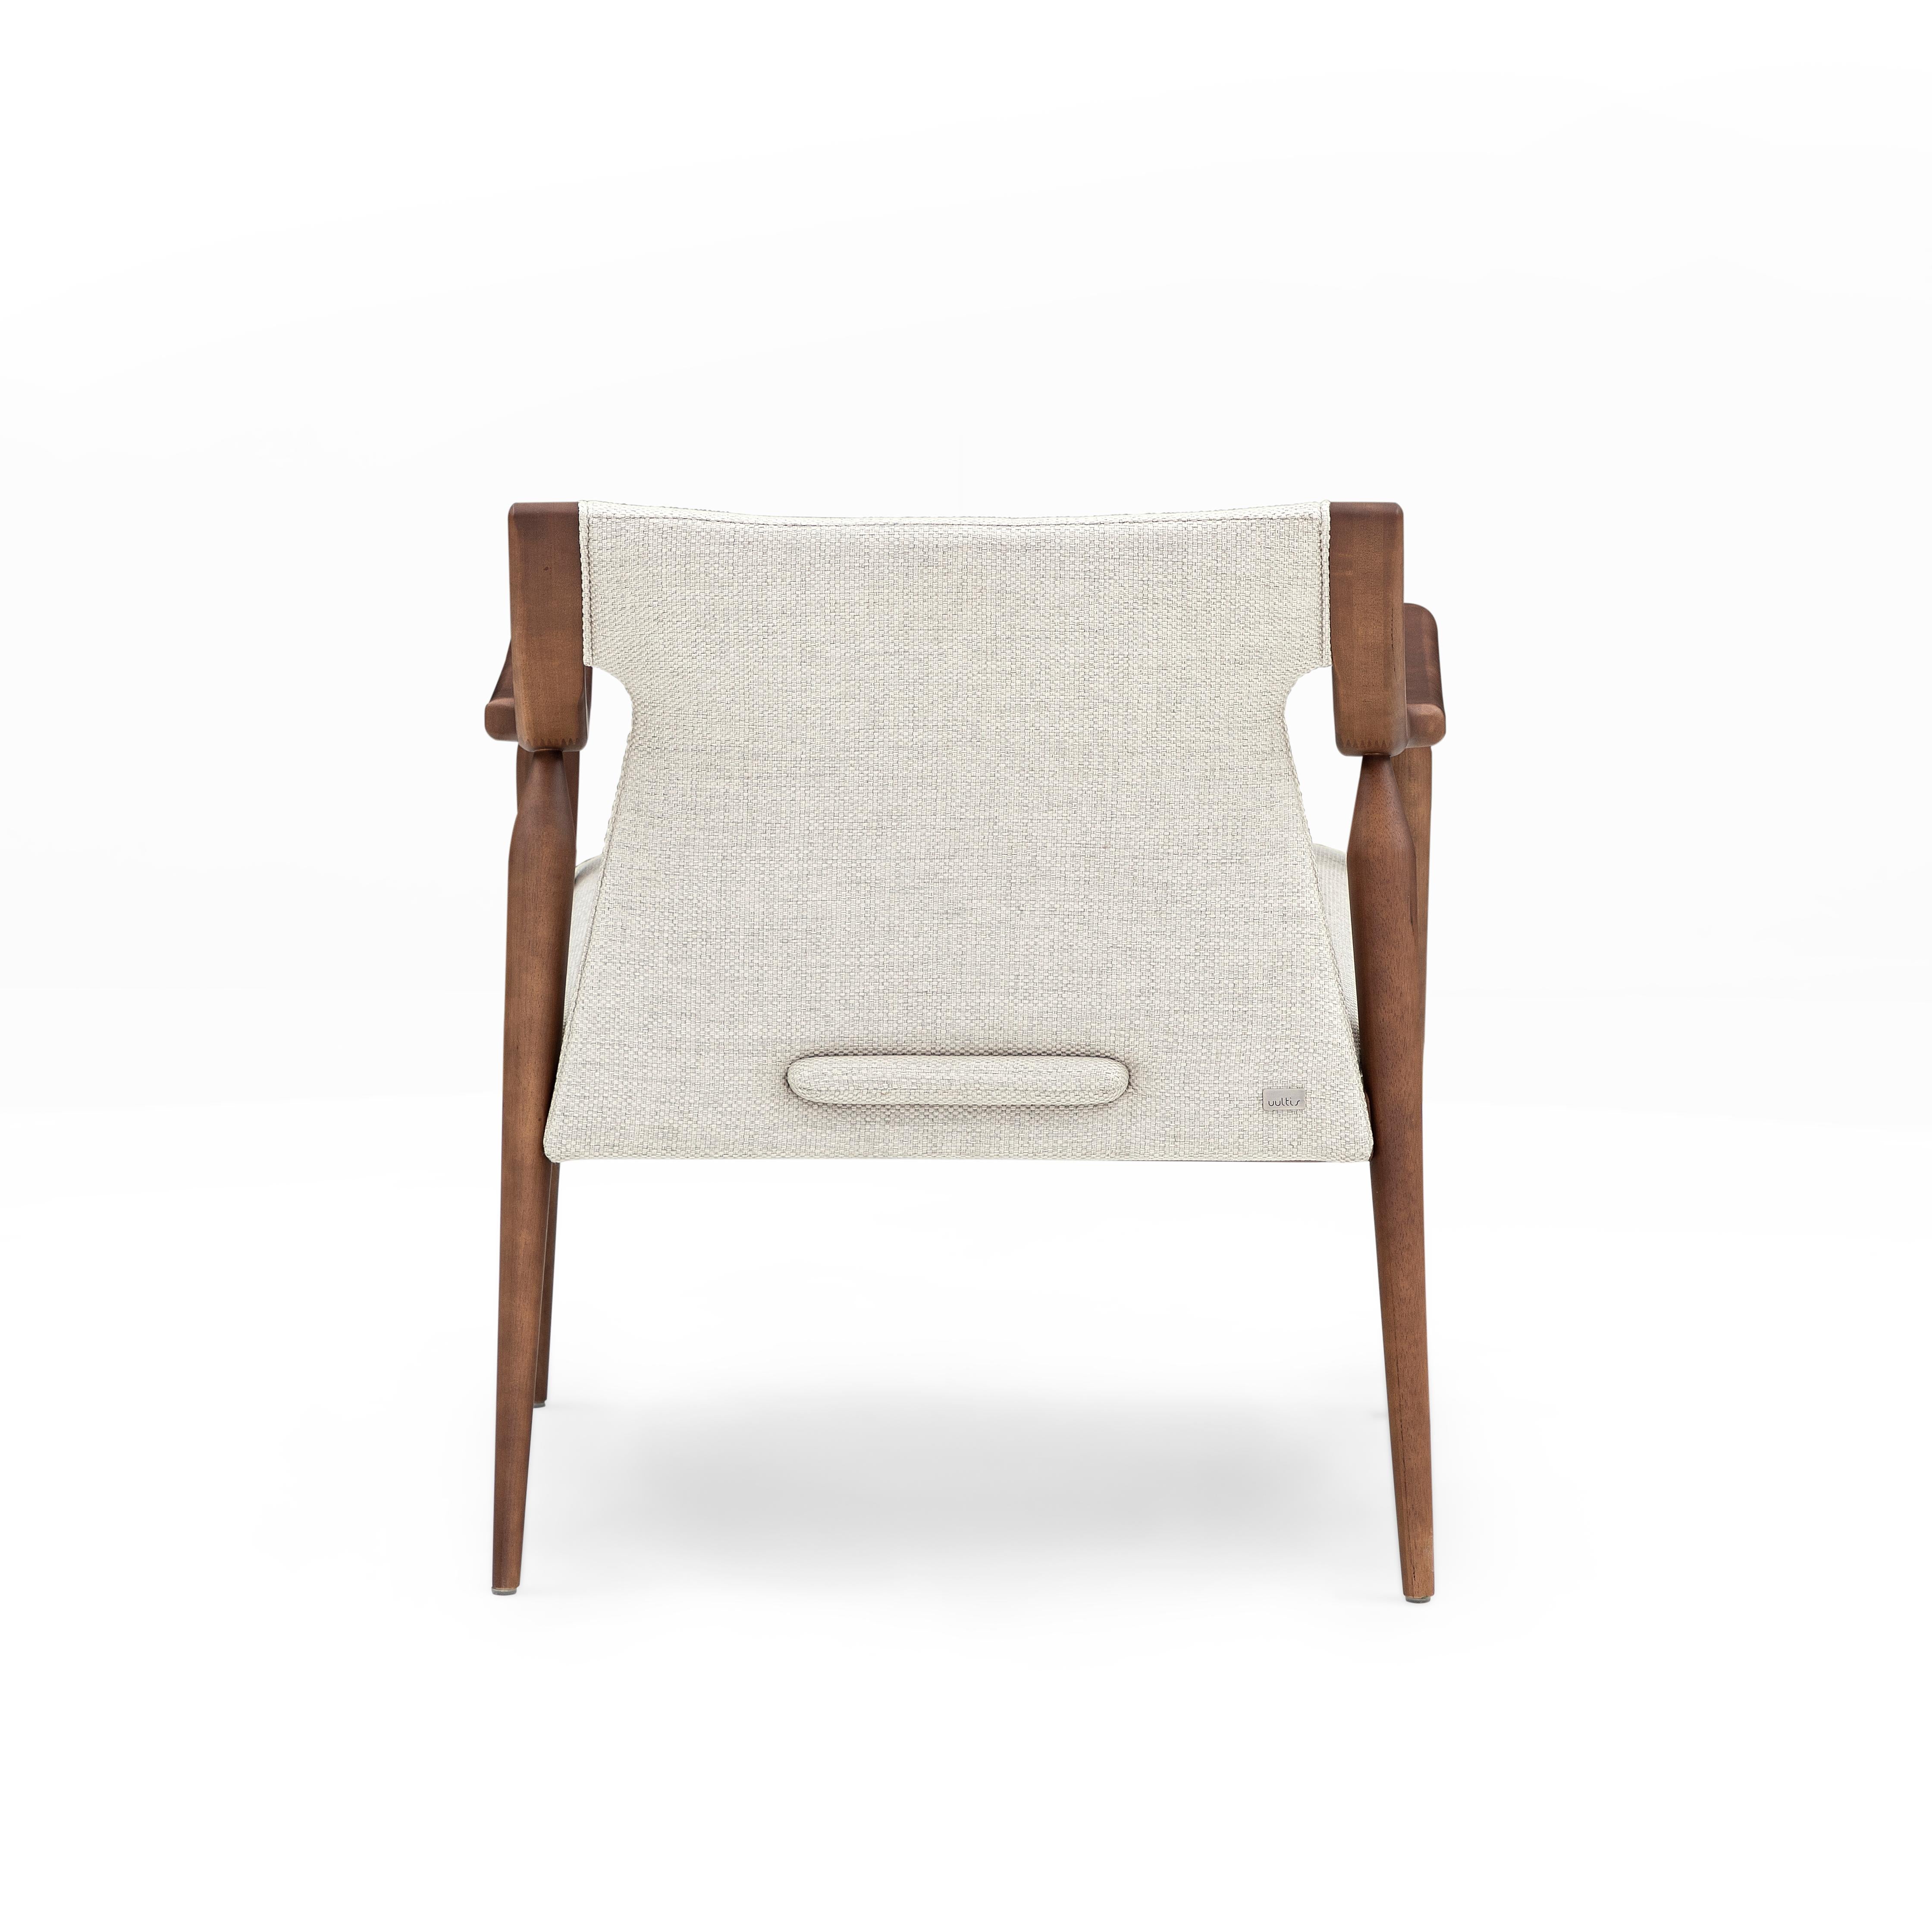 Brazilian Mince Armchair Featuring Curved Arms and Spindle Legs in Walnut Wood Finish For Sale